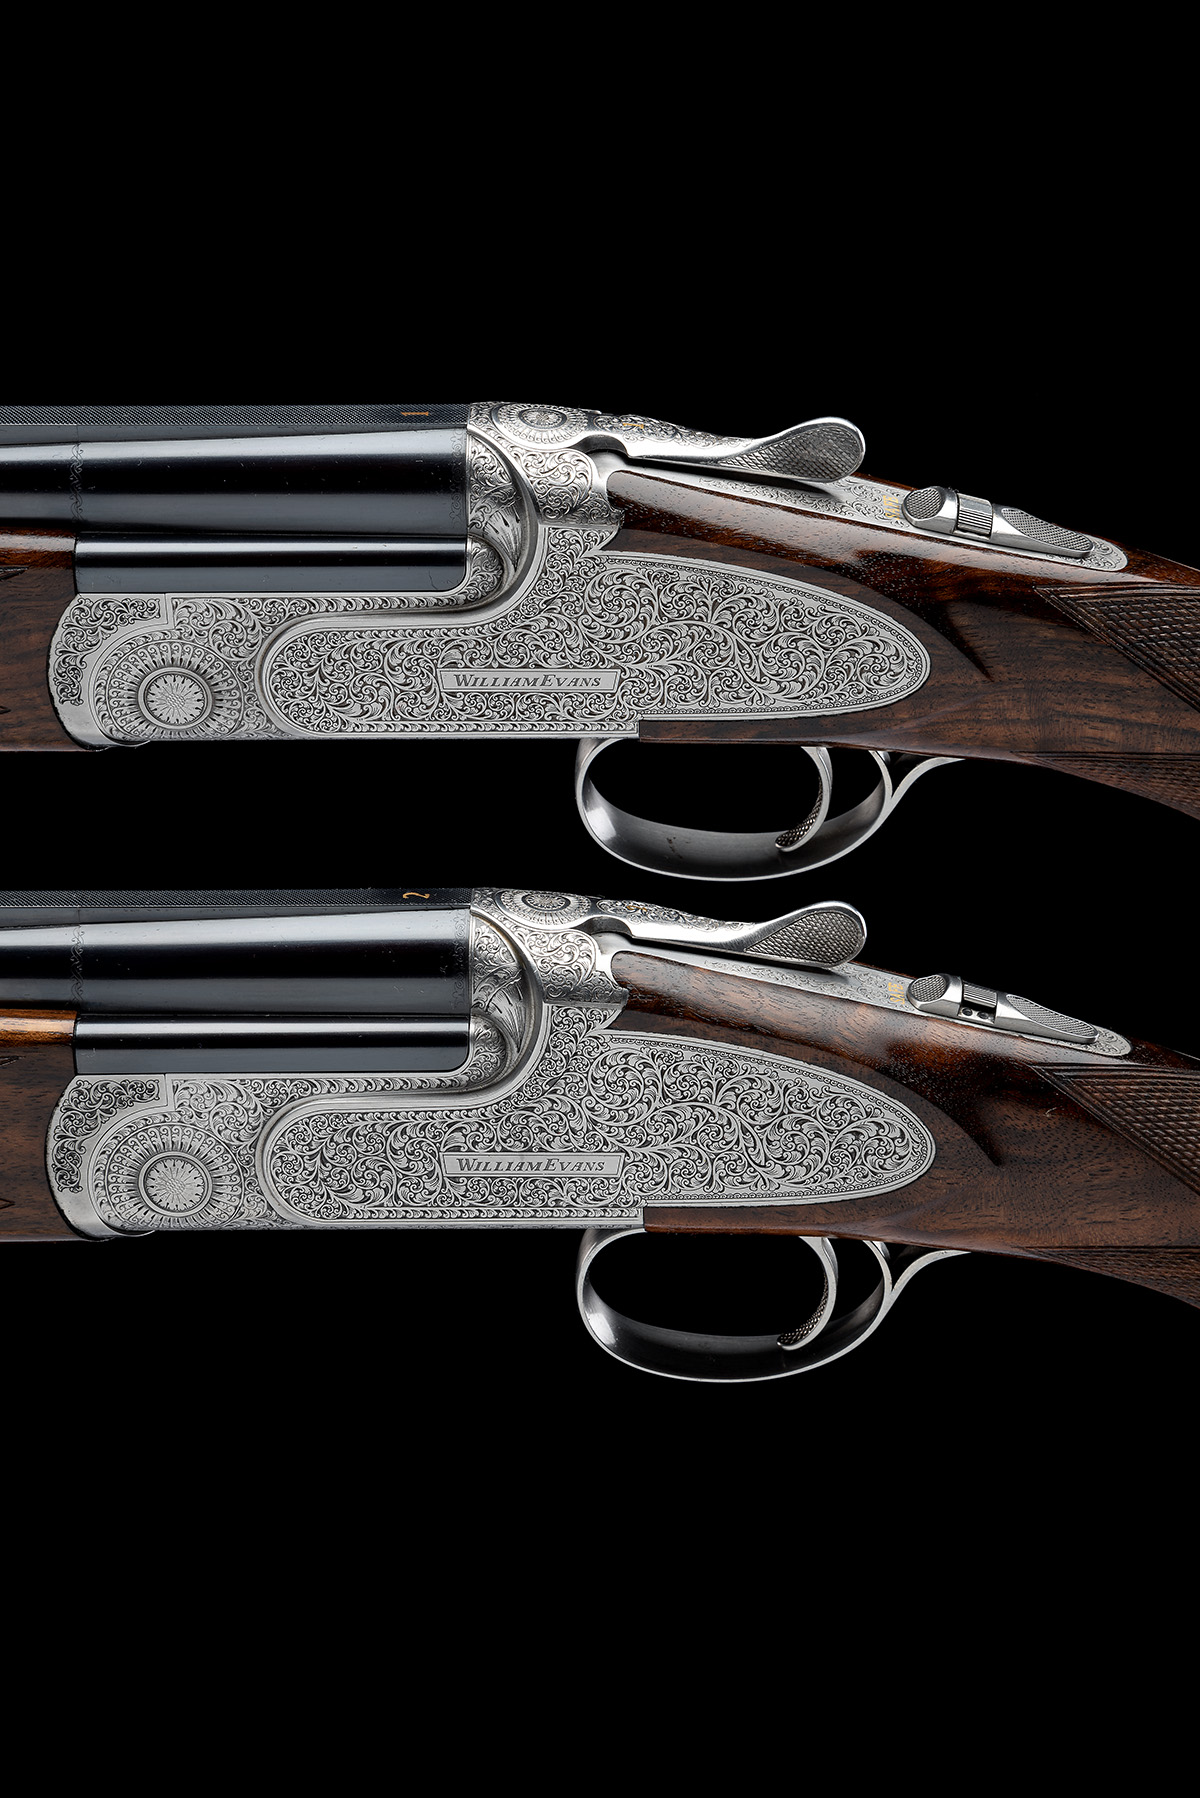 WILLIAM EVANS A PAIR OF 20-BORE (3IN.) 'ST. JAMES' SINGLE-TRIGGER SIDEPLATED OVER AND UNDER - Image 7 of 11